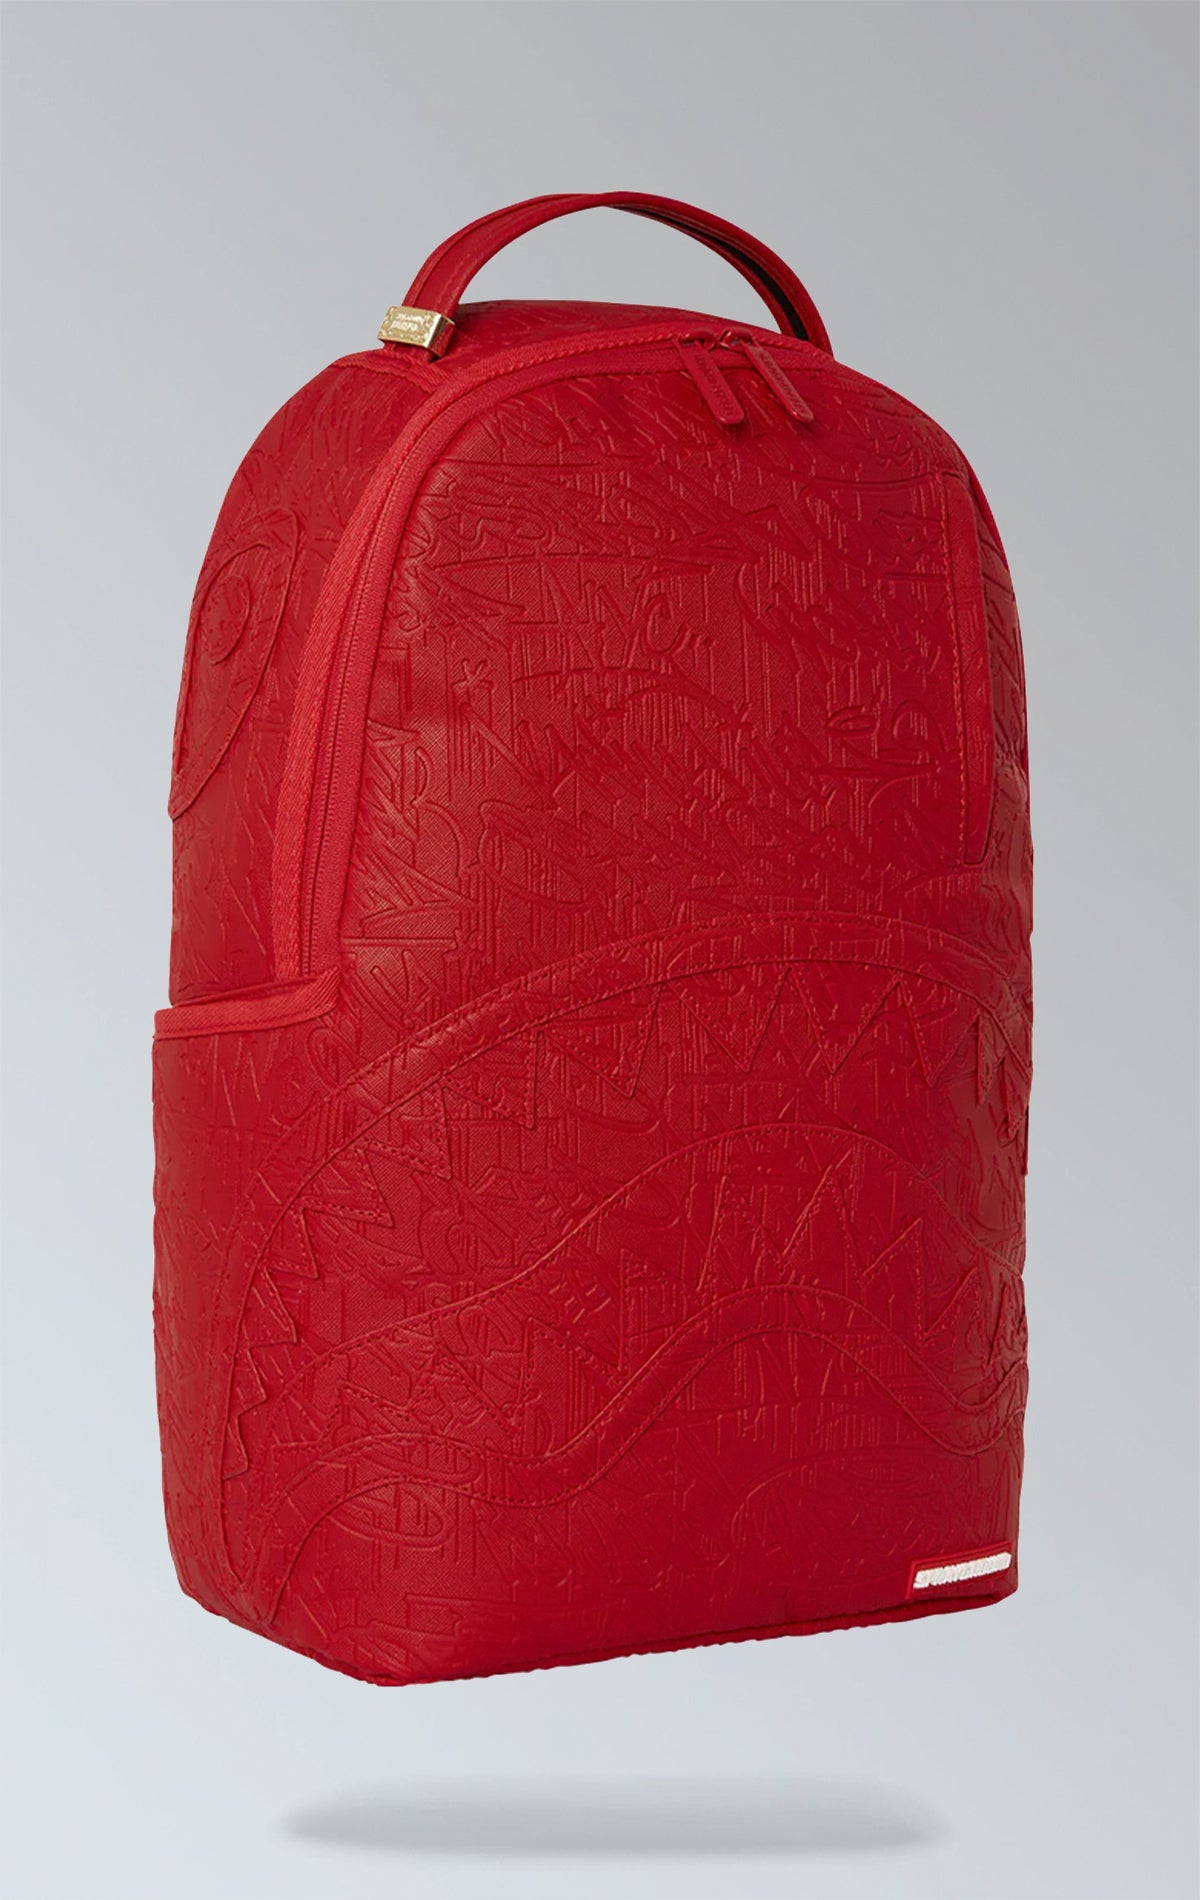 Red Sprayground backpack with an eye-catching scribble design. Features multiple compartments including a separate velour laptop compartment, side pockets, and a hidden zippered pocket. Equipped with ergonomic mesh back padding, adjustable straps, and a sliding back sleeve for attaching to carry-on luggage. Made from durable vegan leather.